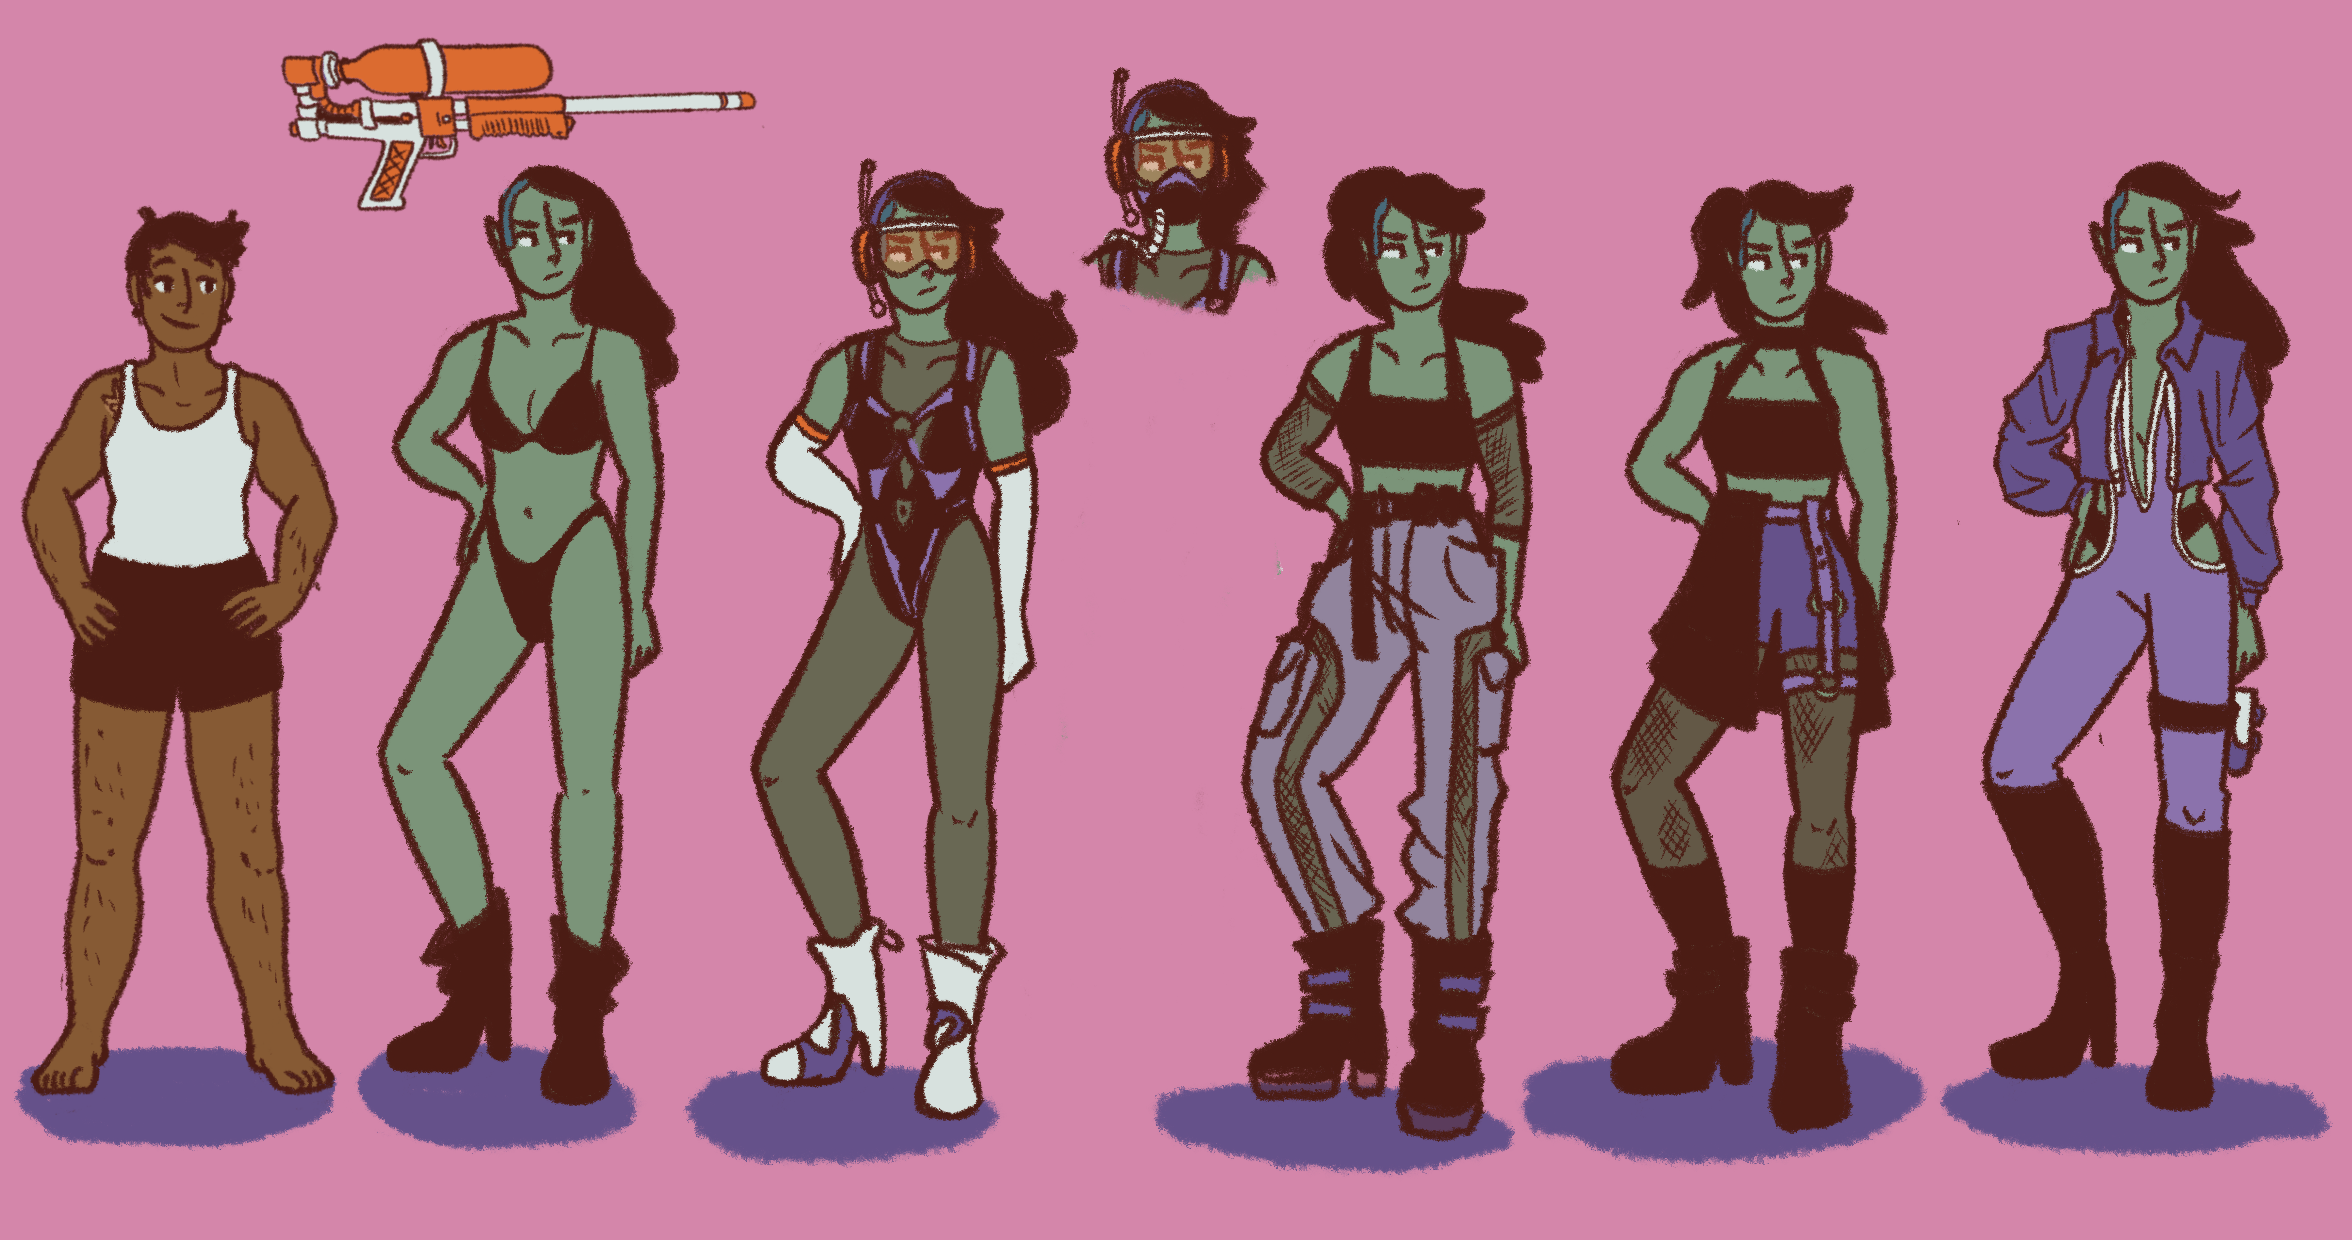 fashion illustrations of an alien lady who is cool and aloof and sexy